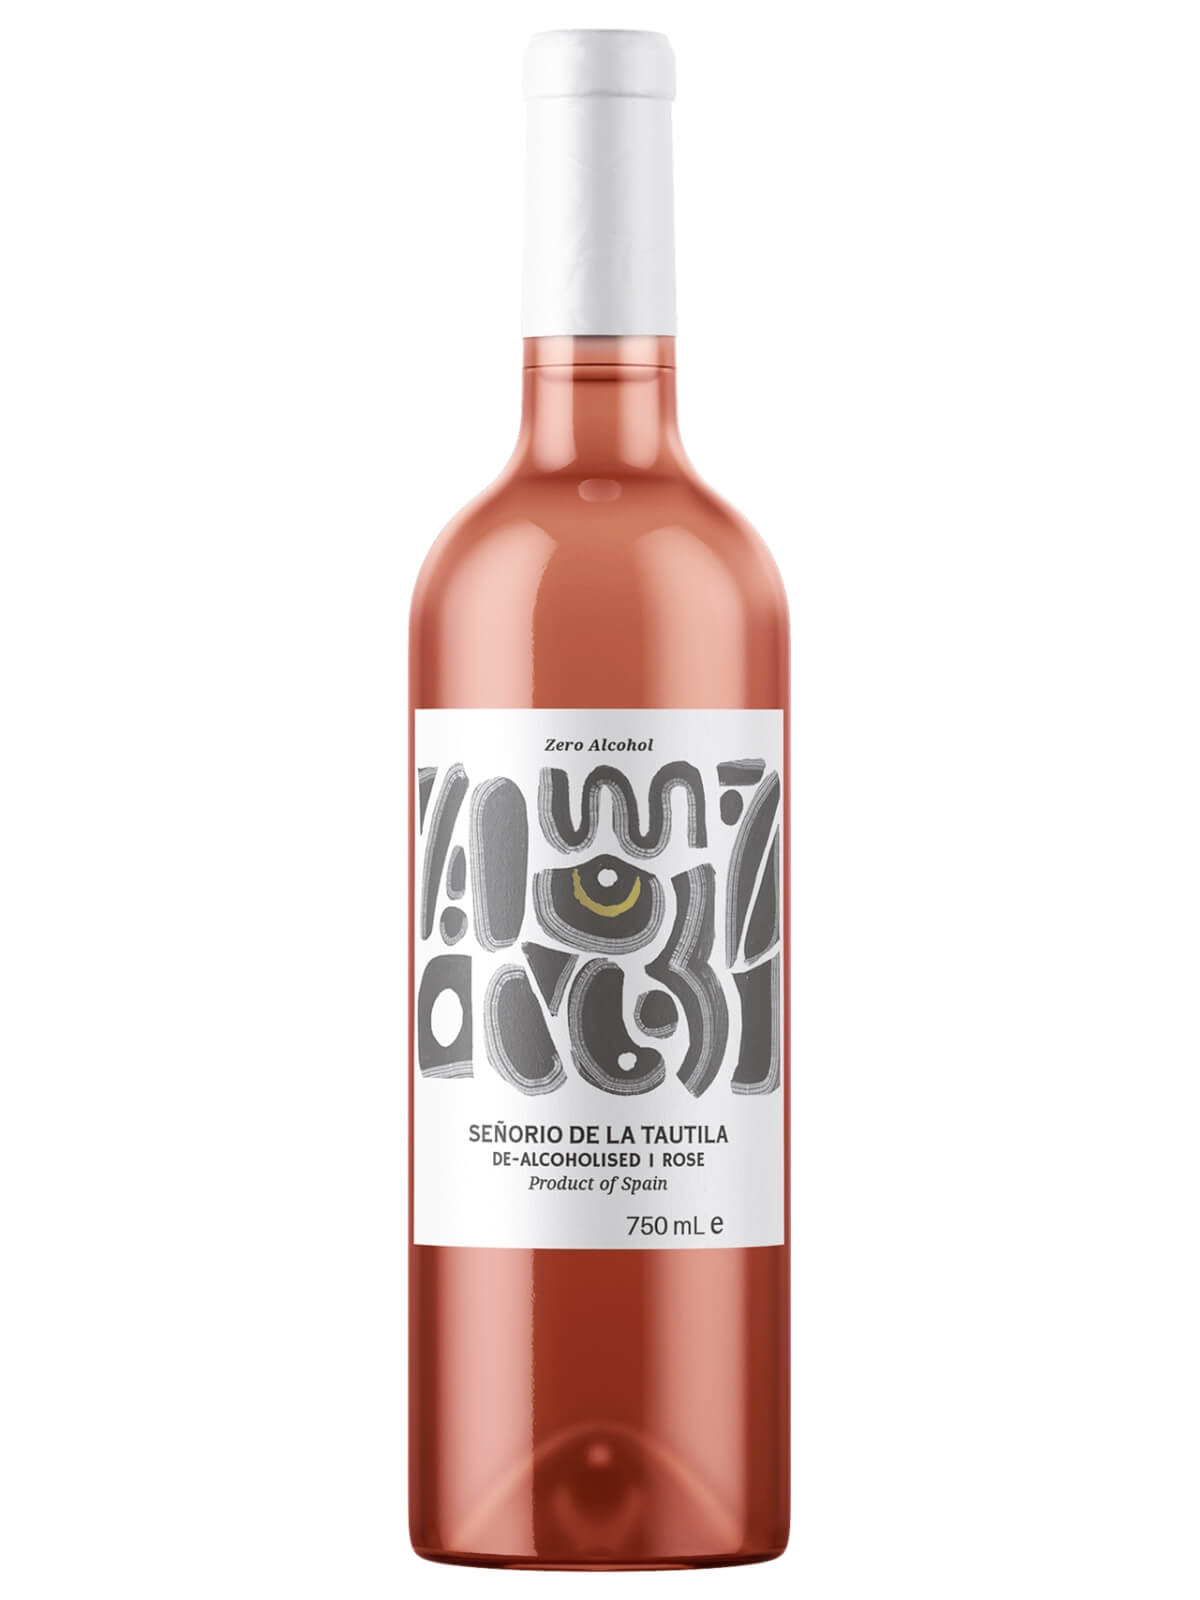 product image of a de-alcoholised rosé called senoria de la tautila in a tall glass wine bottle with a white label and gray writing and patterns.